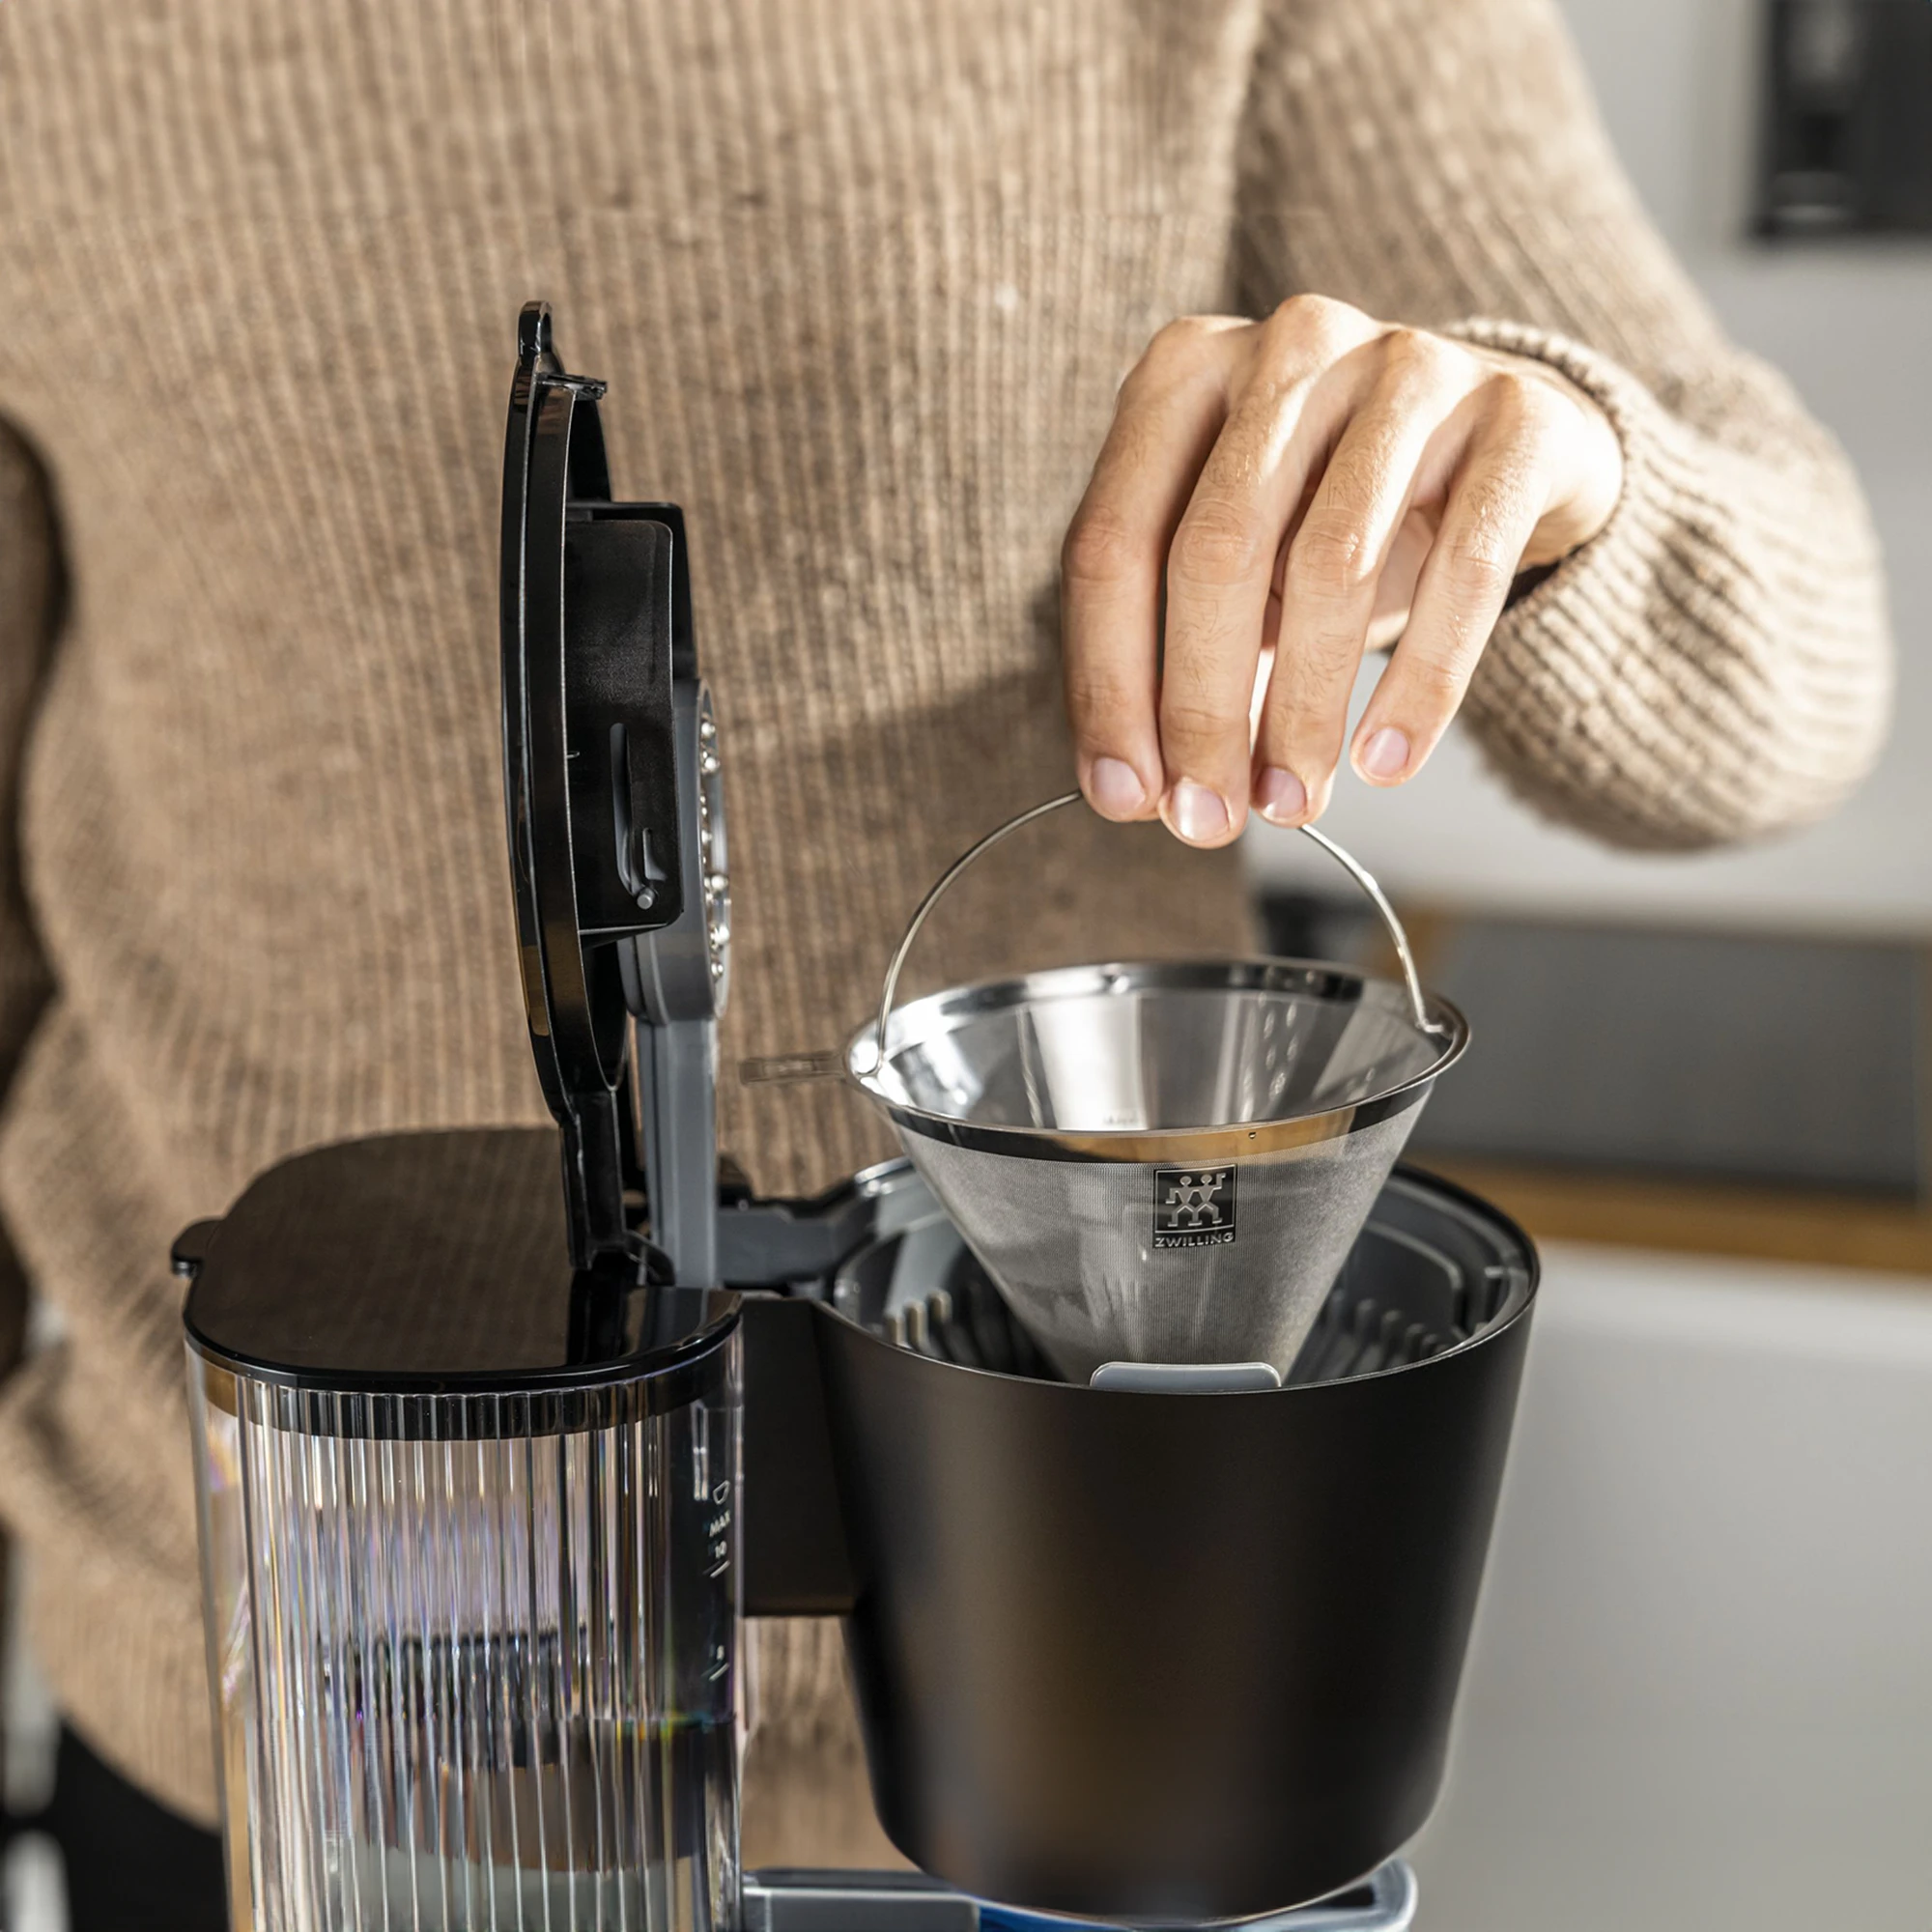 https://www.homethreads.com/files/zwilling/1022997-zwilling-enfinigy-drip-coffee-maker-stainless-steel-permanent-filter-4.webp